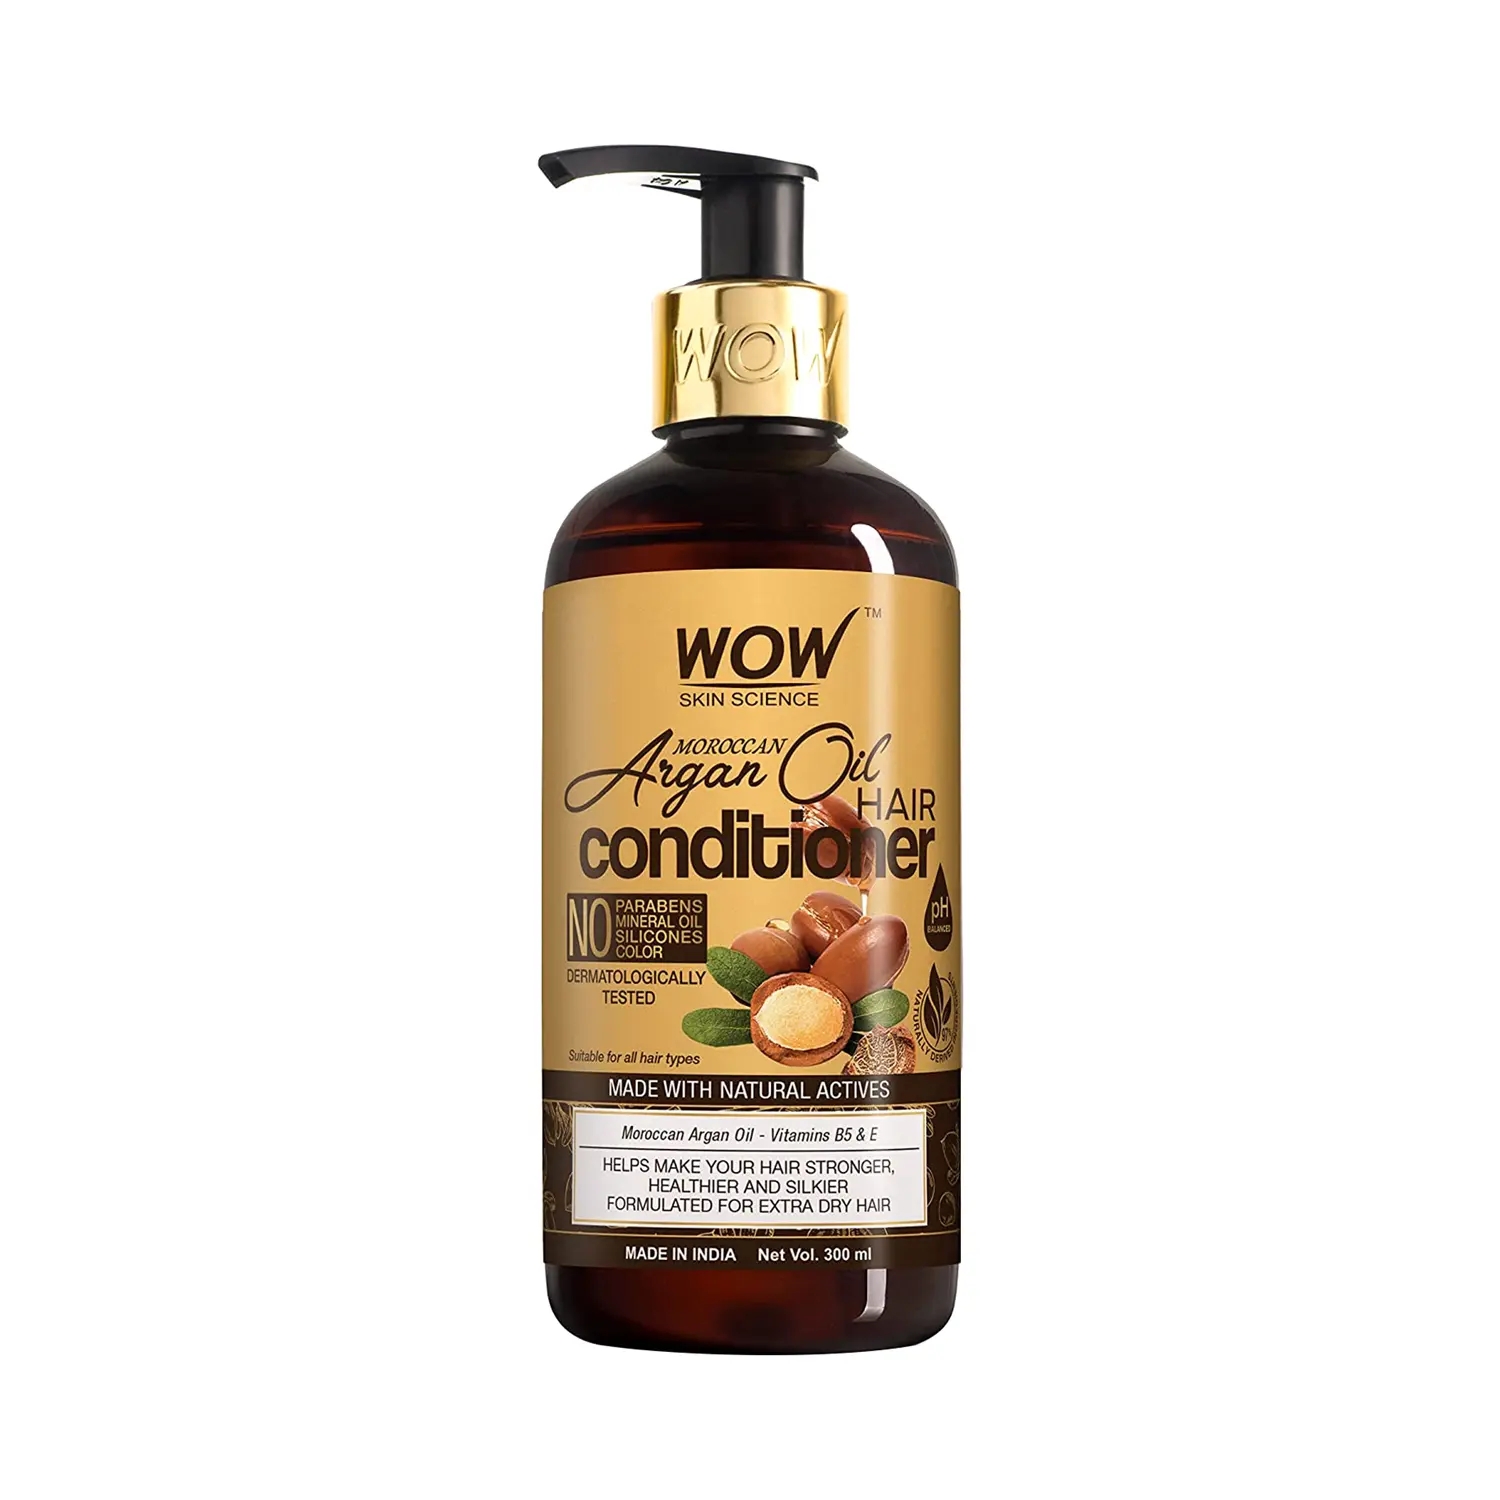 WOW SKIN SCIENCE | WOW SKIN SCIENCE Moroccan Argan Oil Conditioner (300ml)